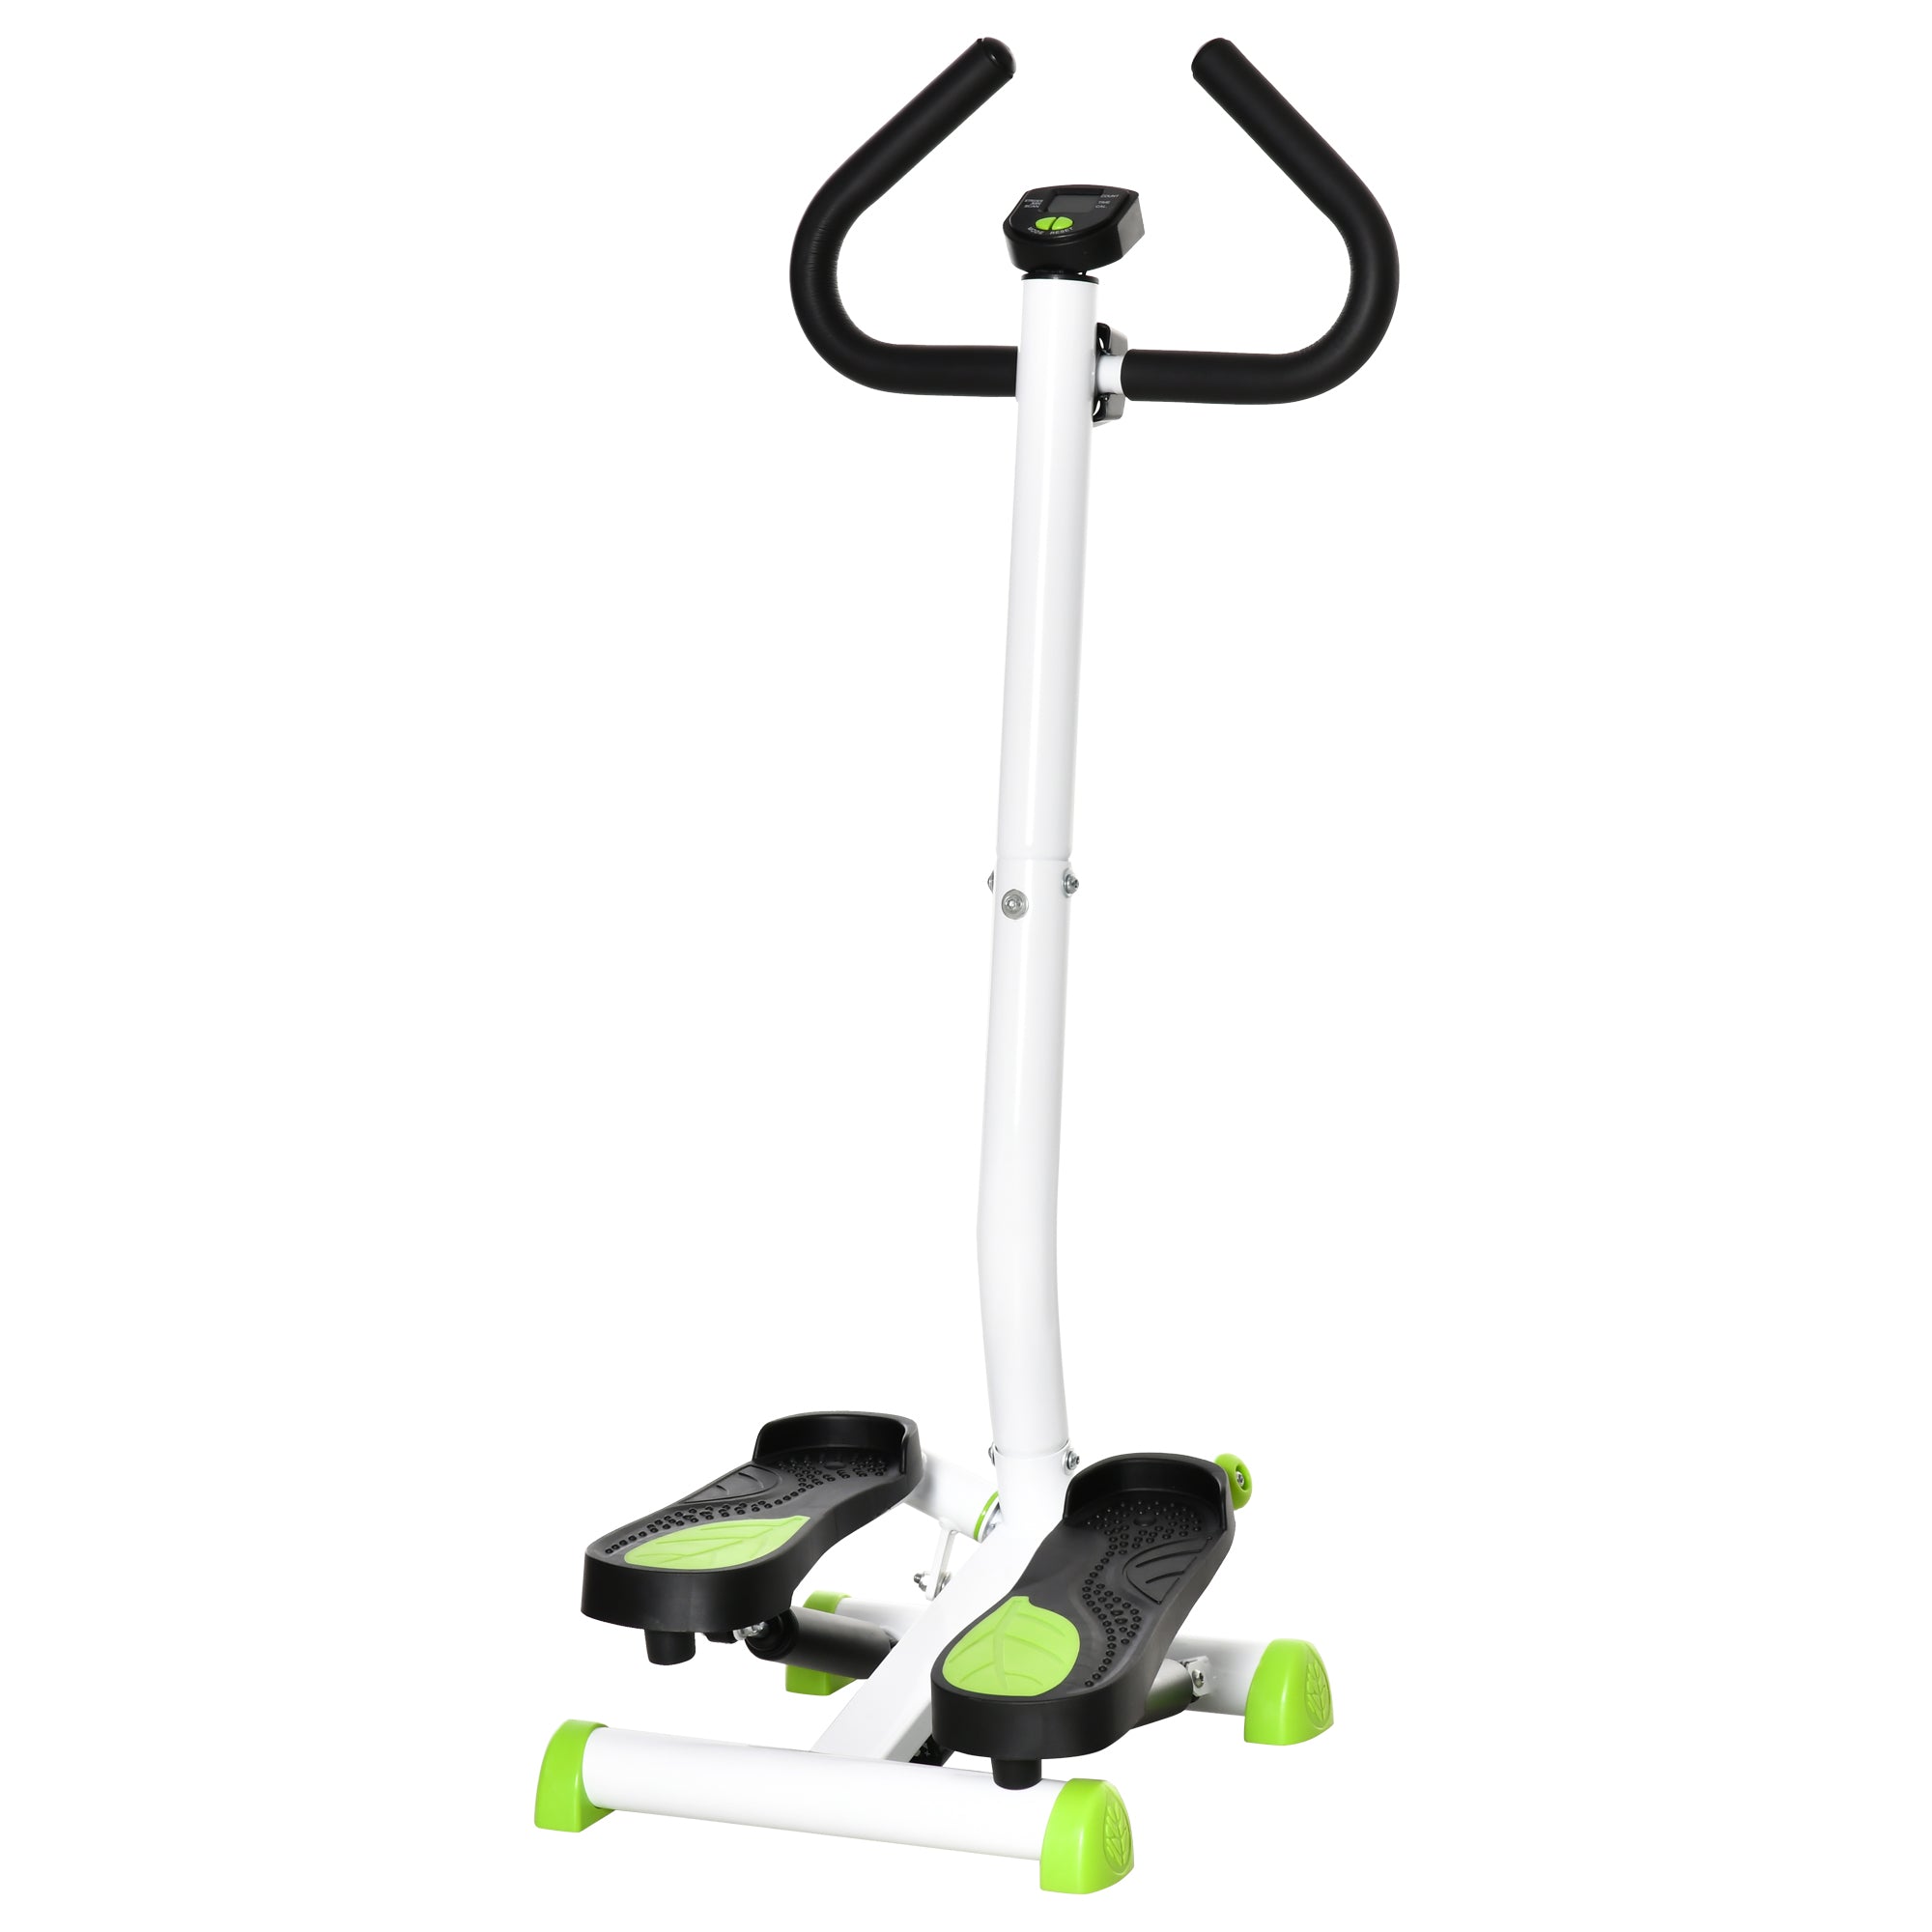 Adjustable Stepper Aerobic Ab Exercise Fitness Workout Machine with LCD Screen & Handlebars, White-1